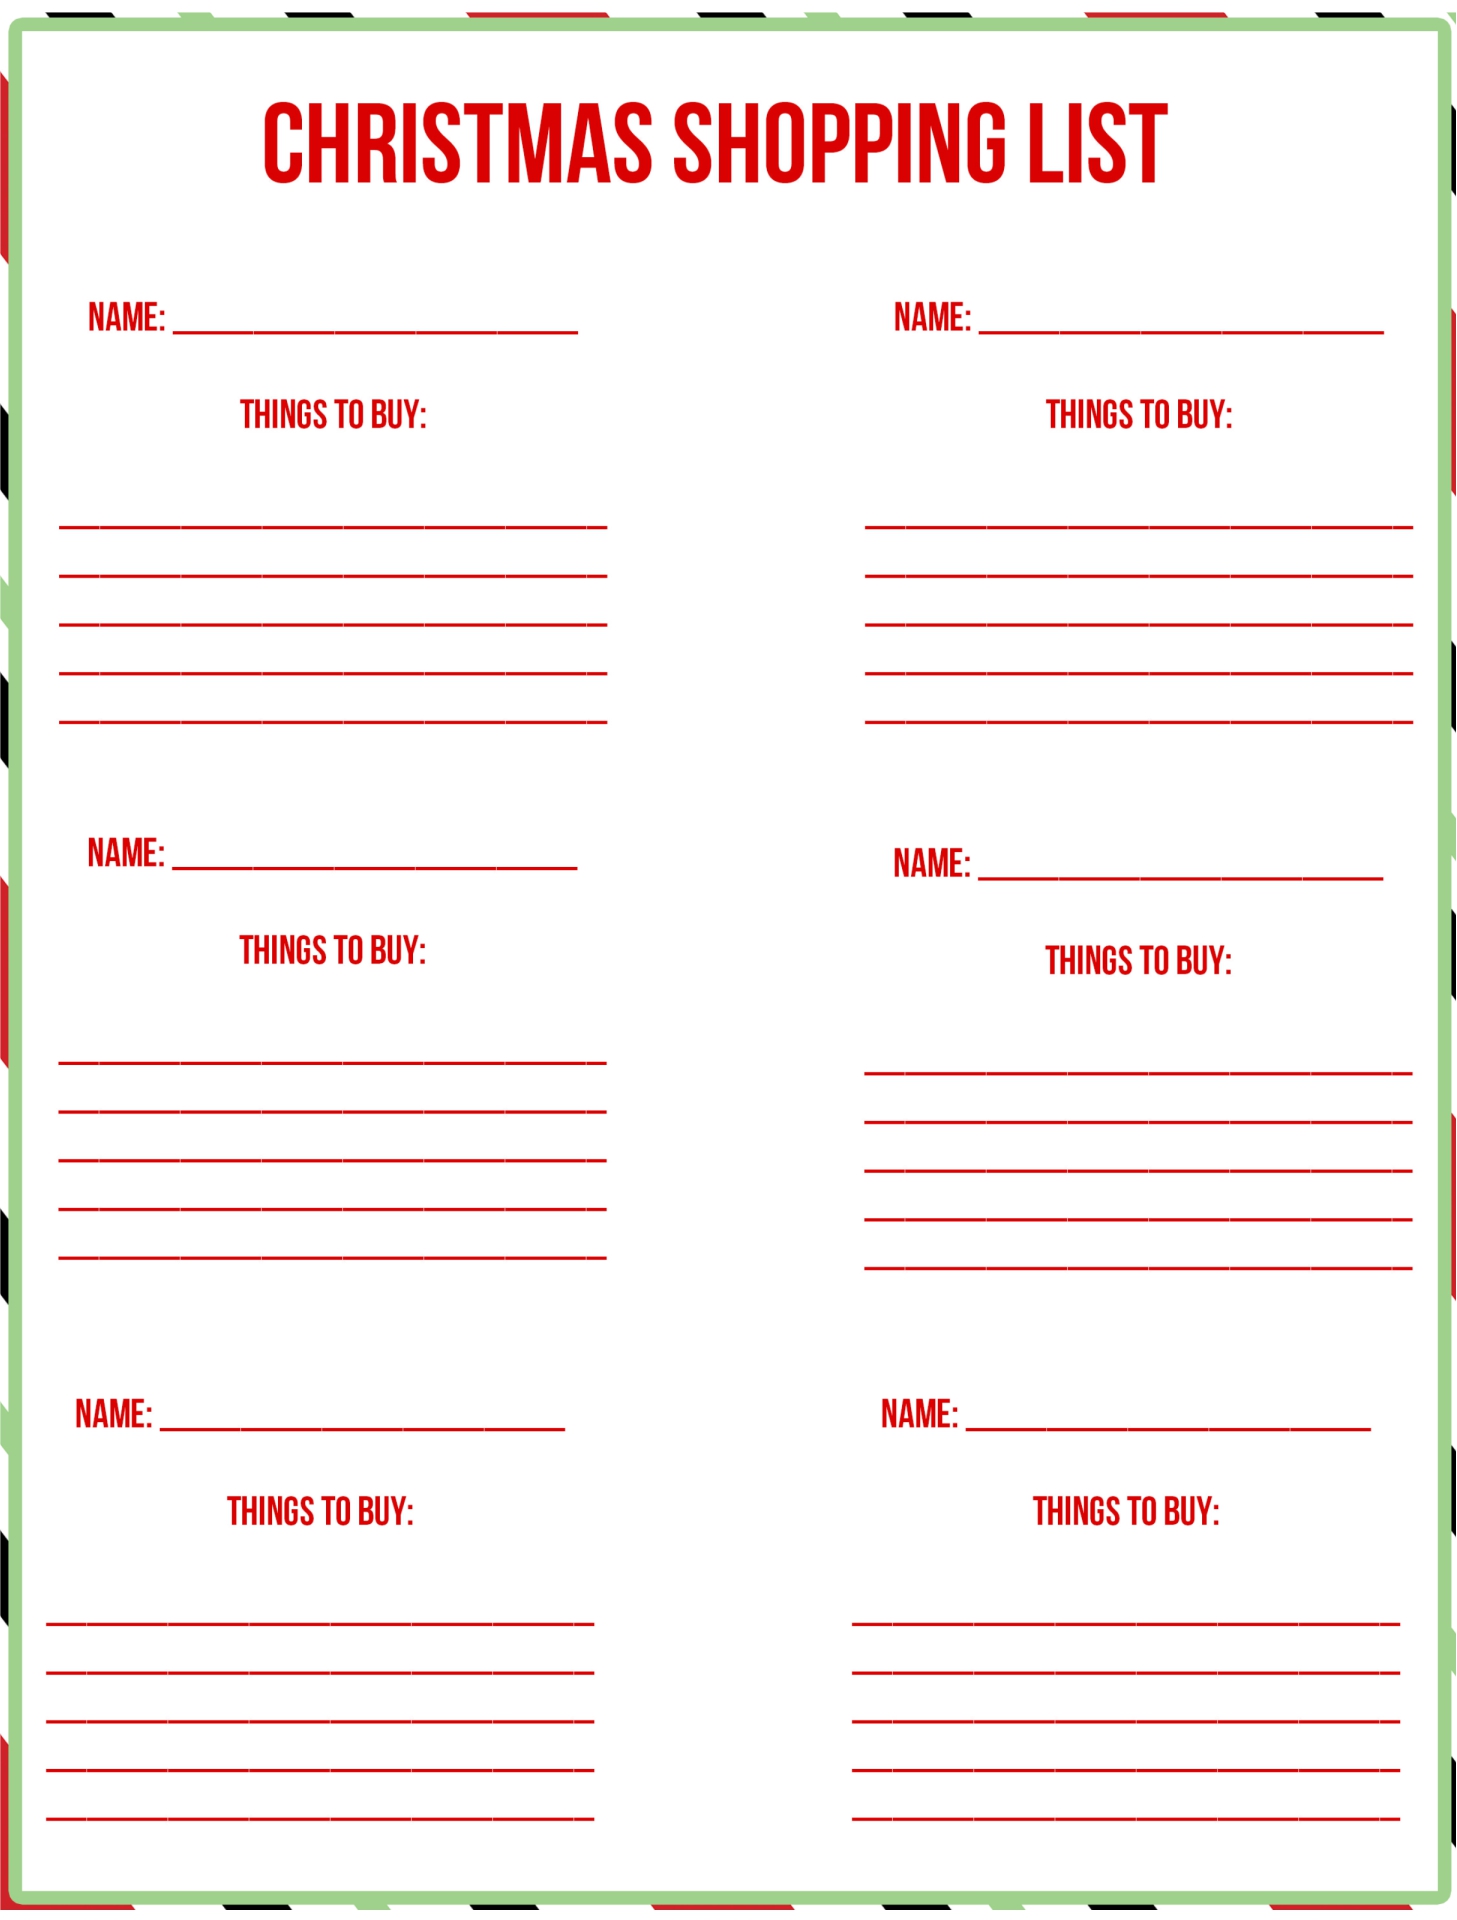 6-best-images-of-free-printable-christmas-gift-list-template